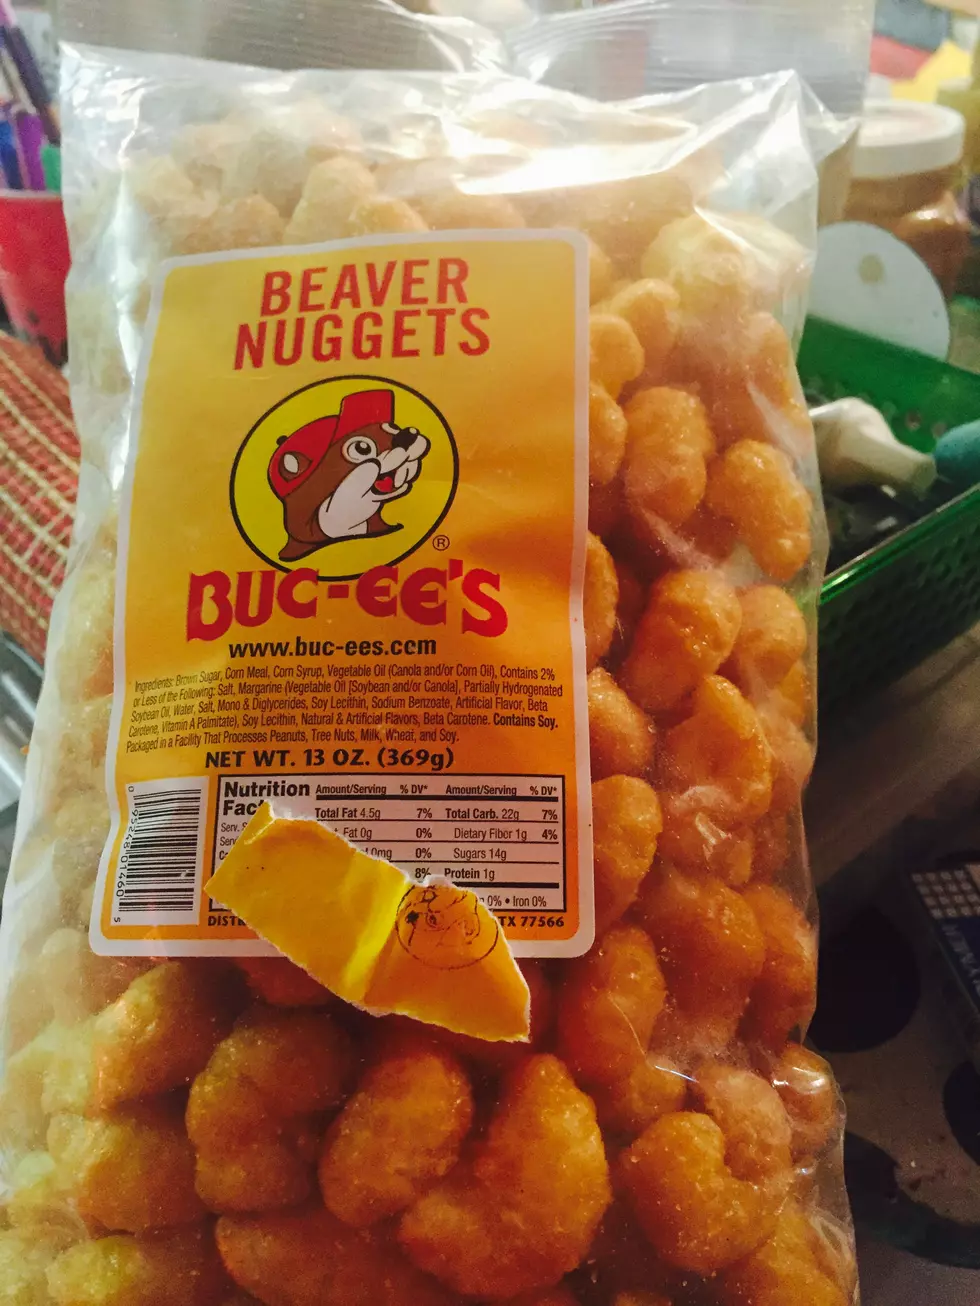 I Want To Go To Bucc-ee’s  I Love Beaver Nuggets